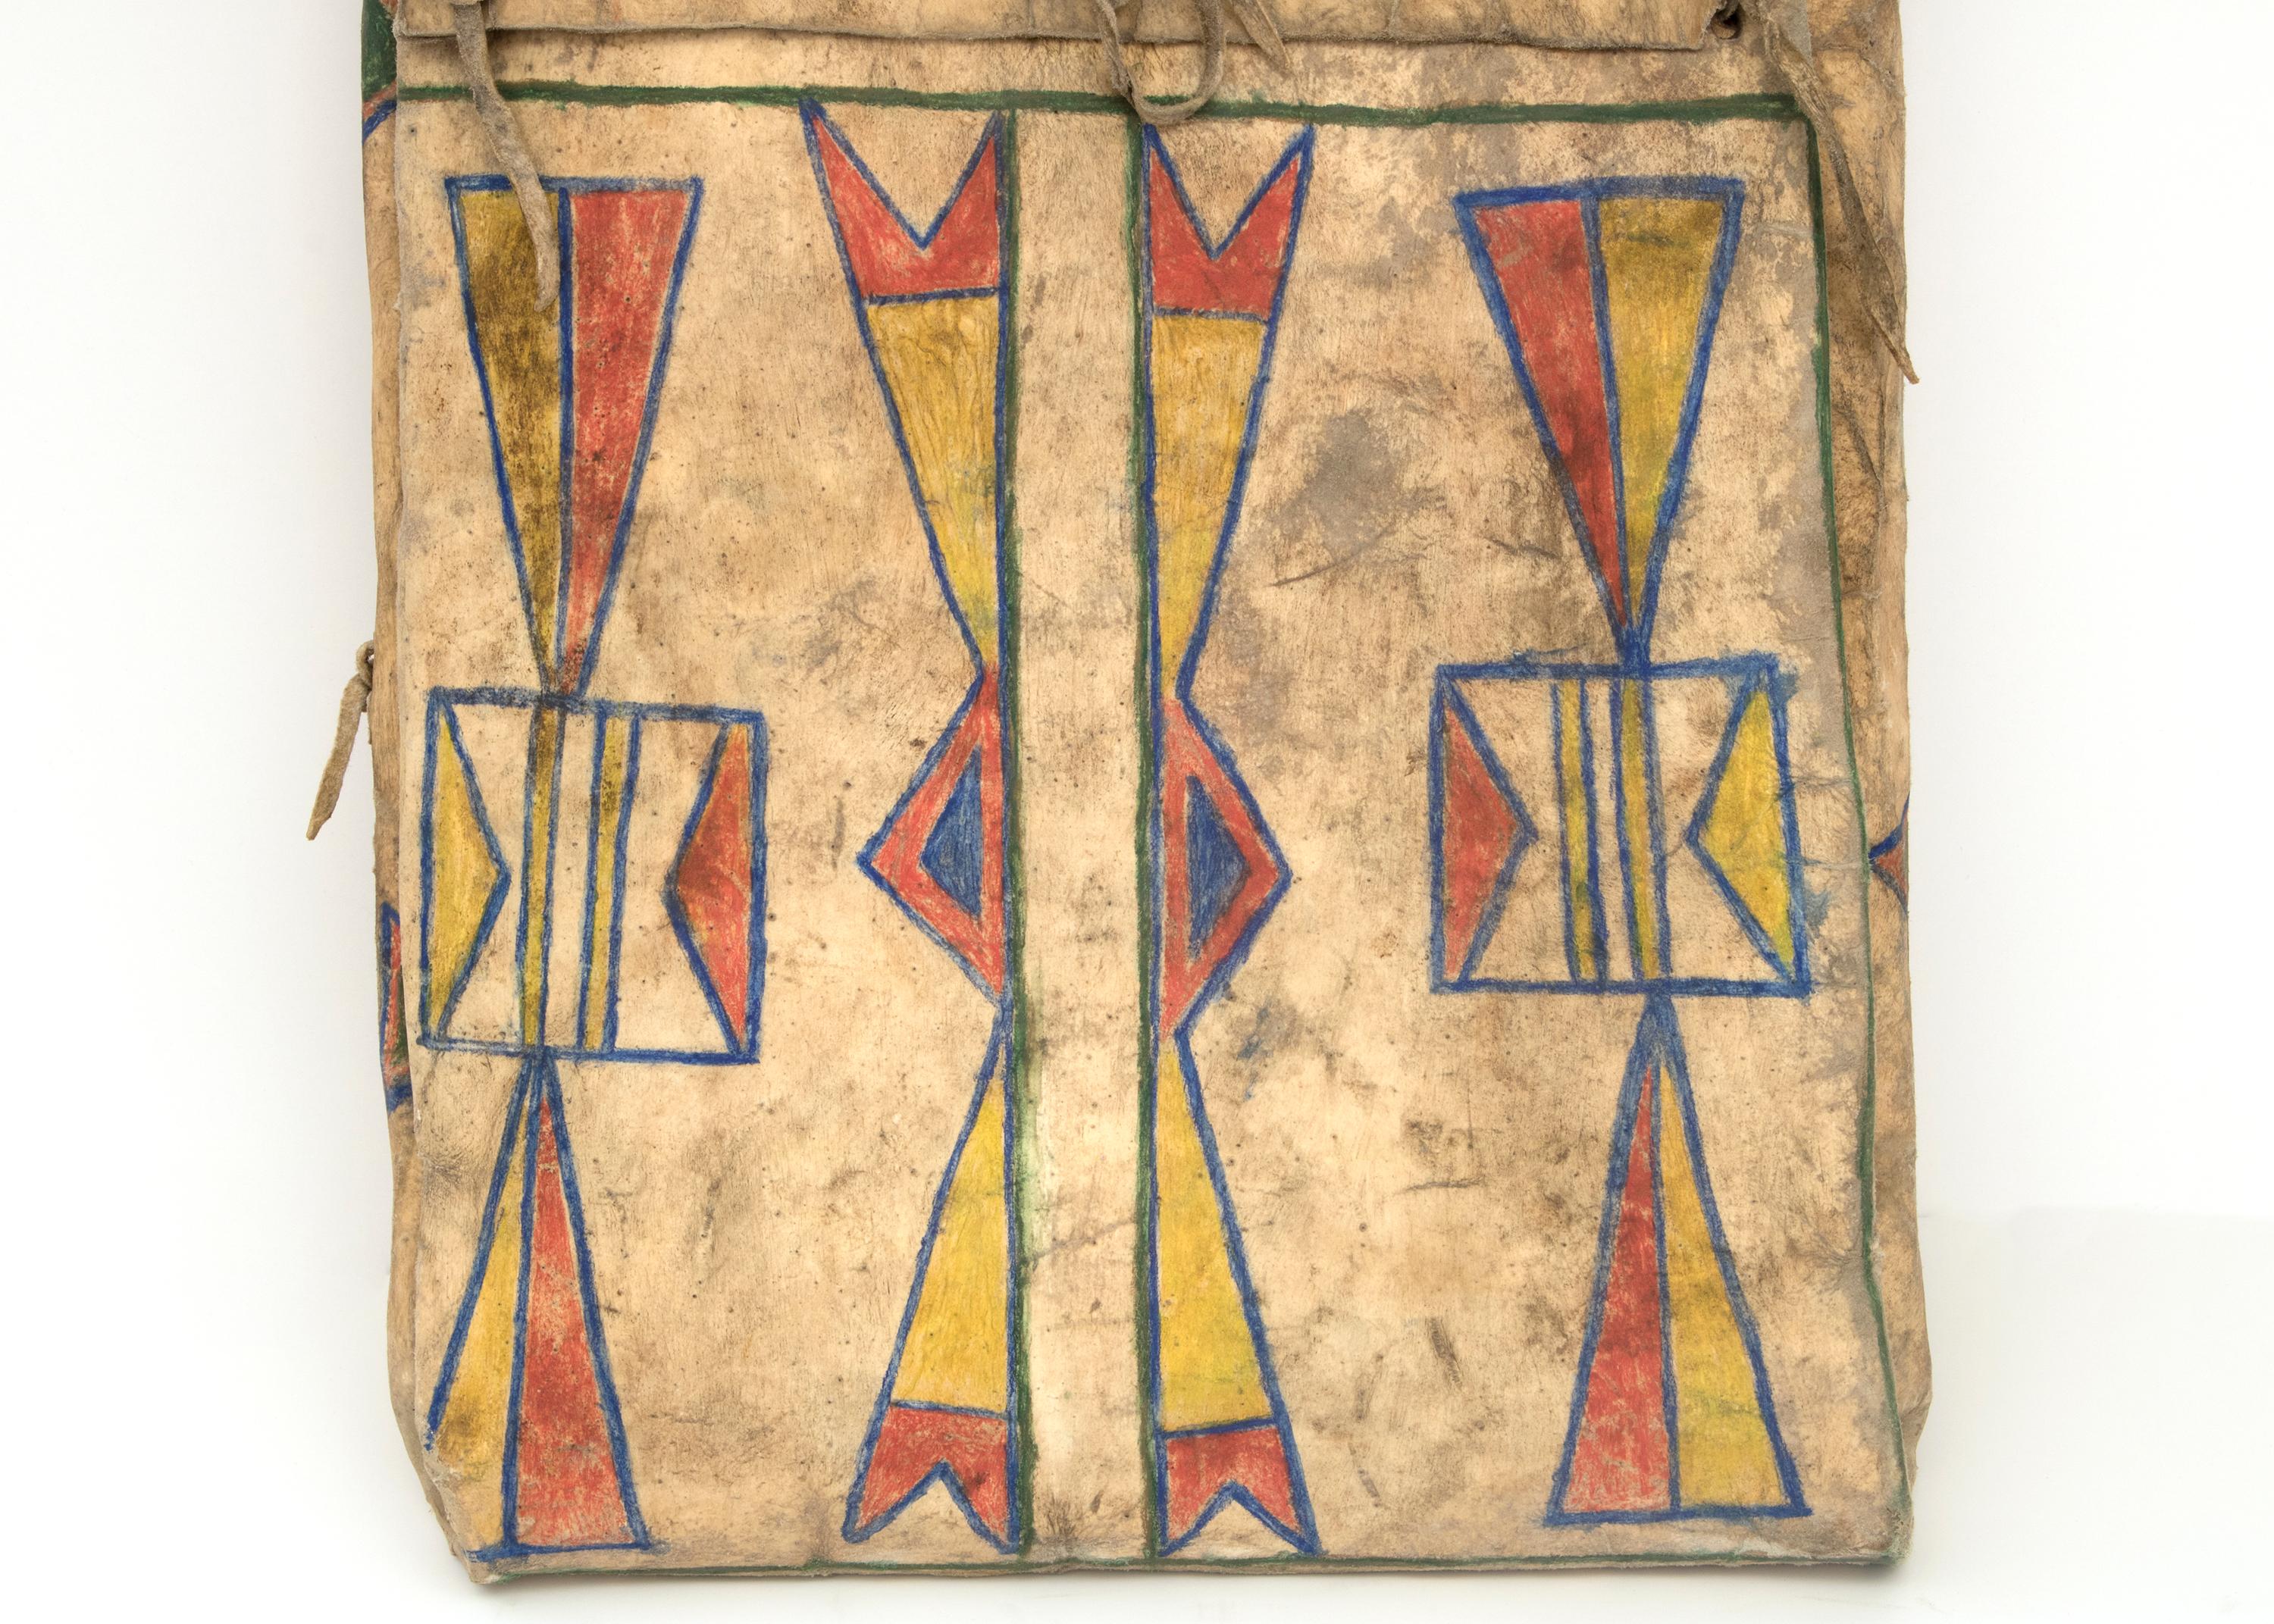 North American 1870s Transitional Plateau Rawhide Parfleche Envelope with Geometric Patterns